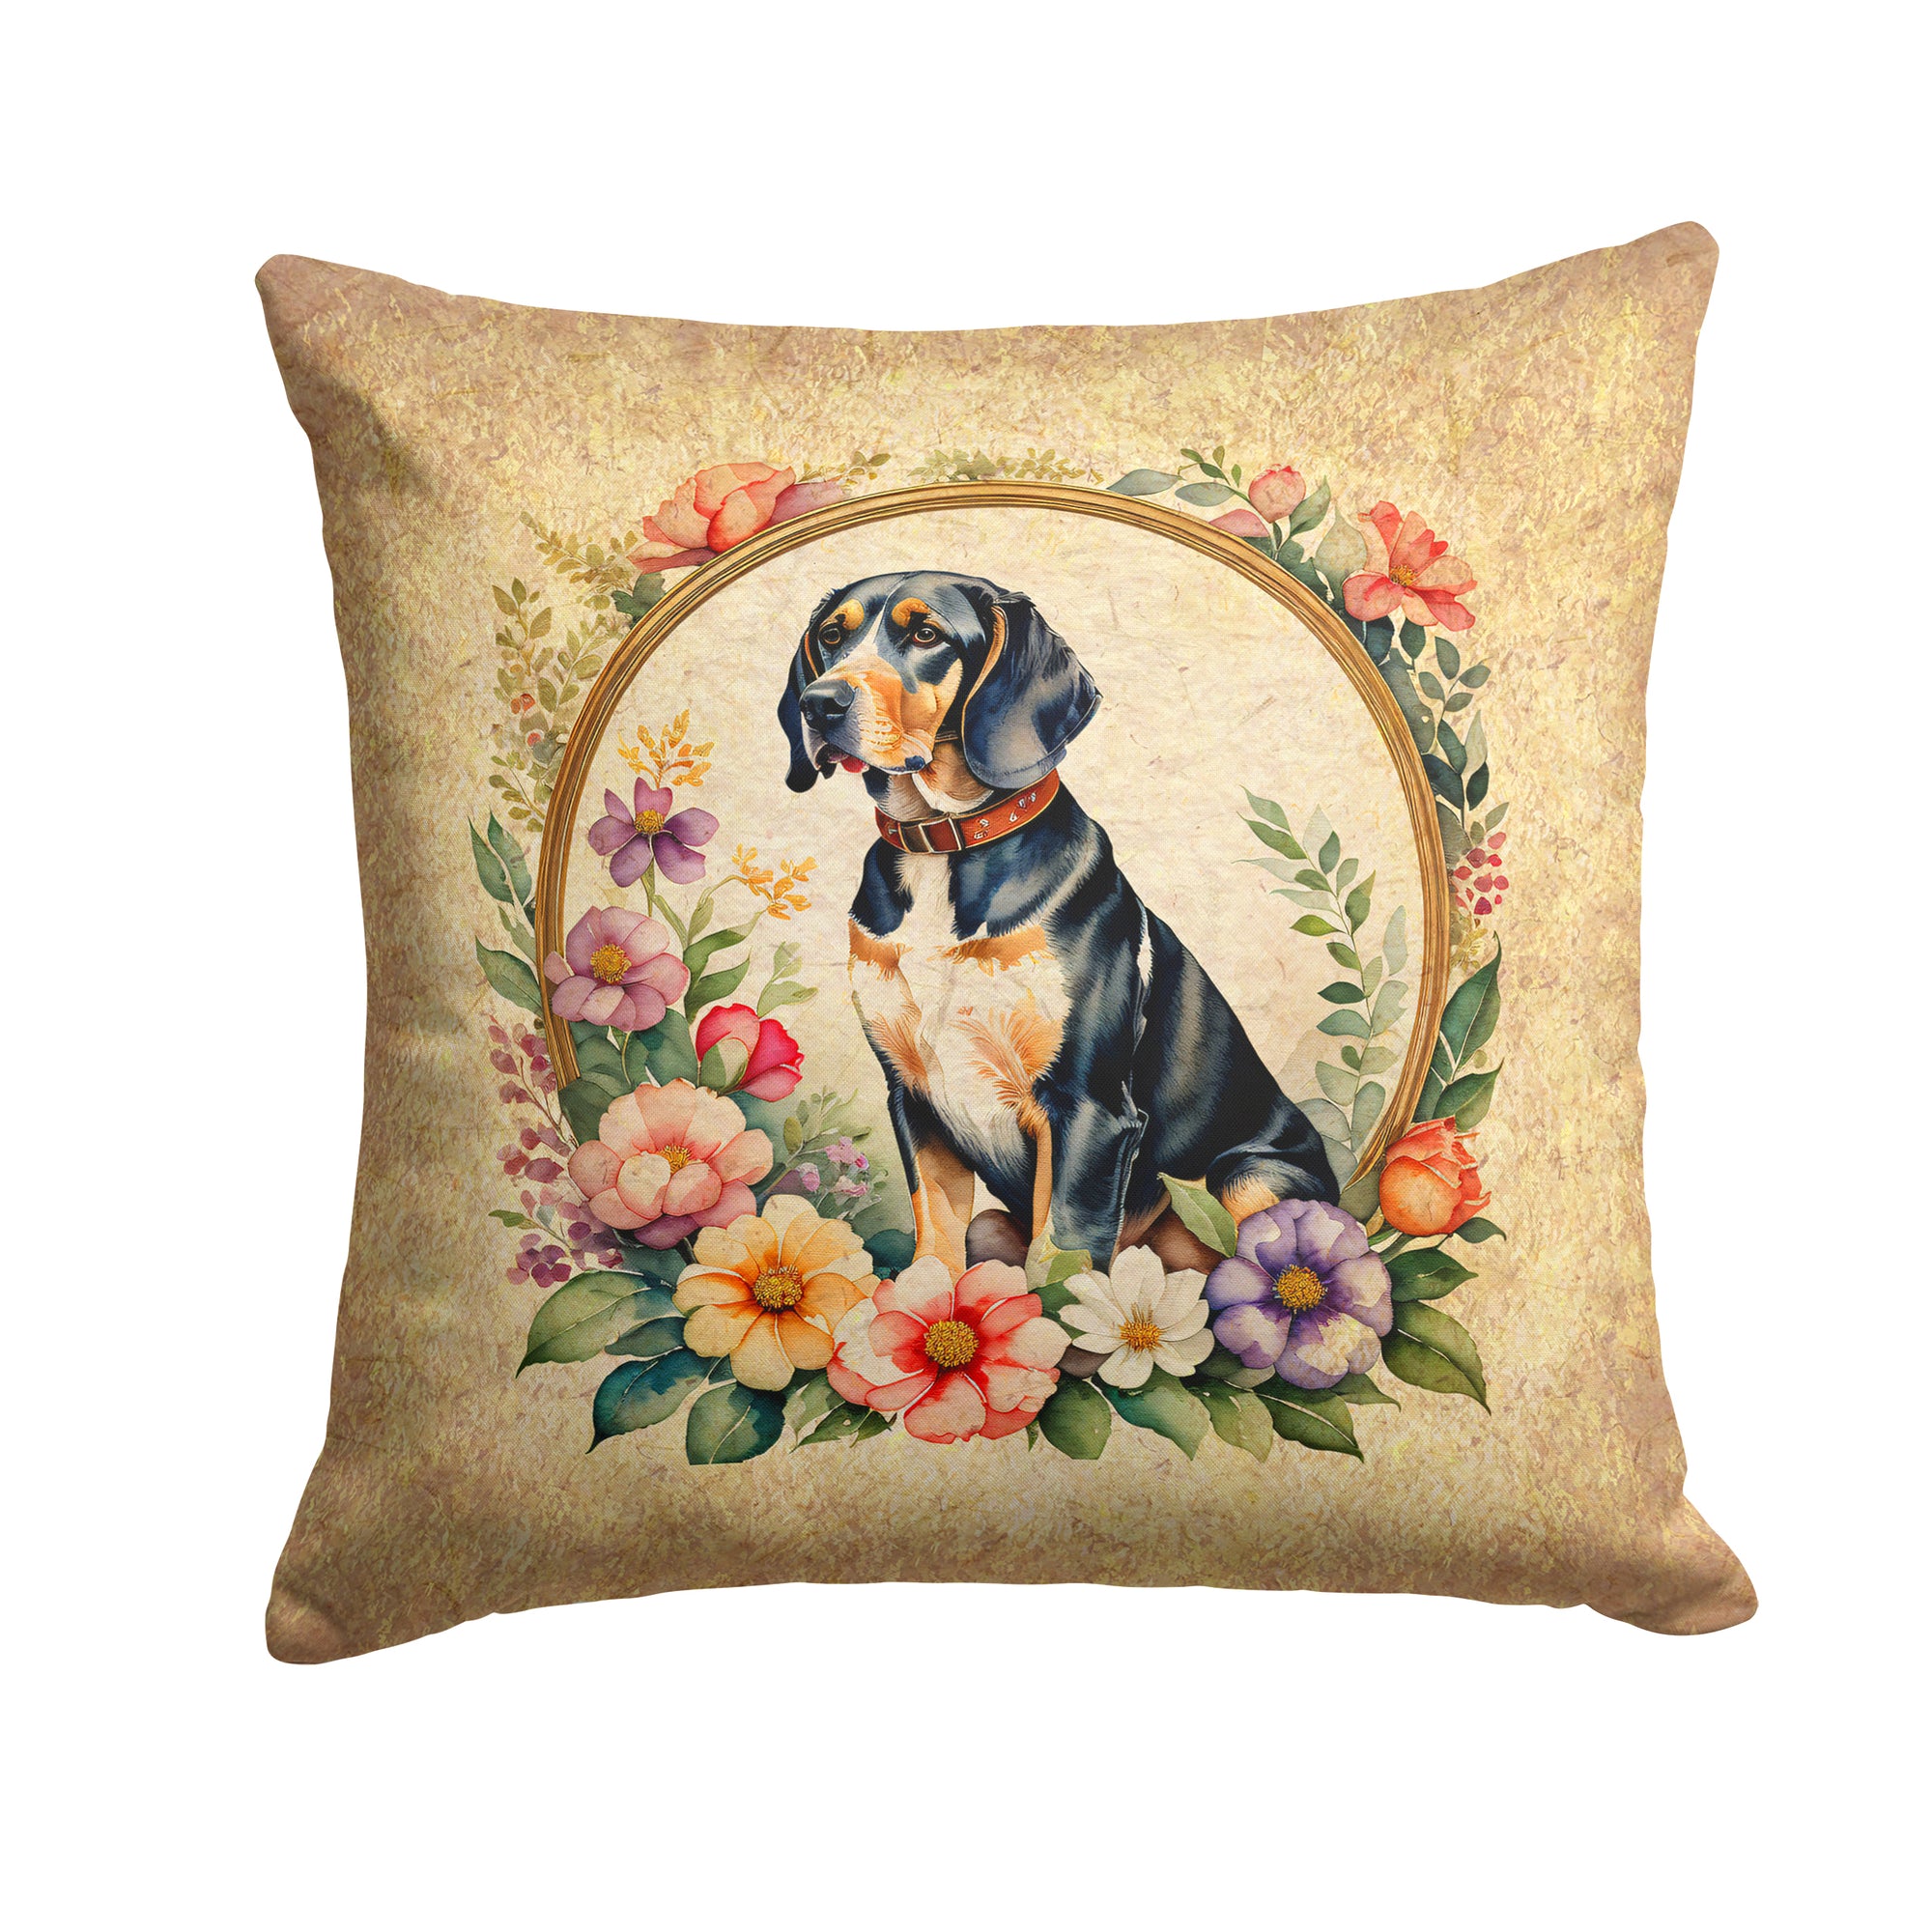 Buy this American English Coonhound and Flowers Fabric Decorative Pillow